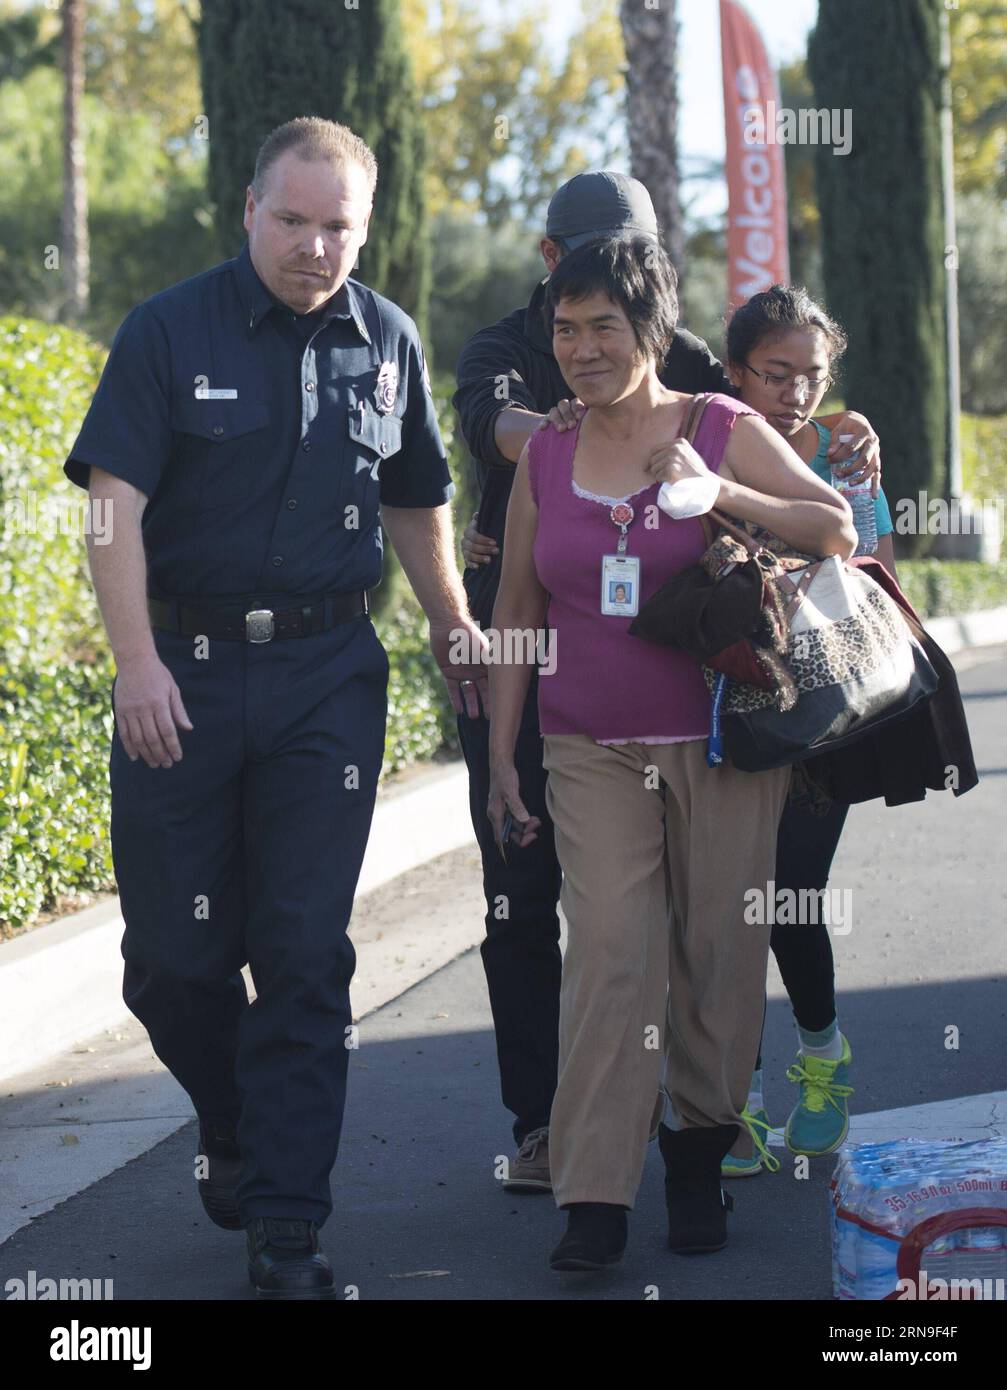 (151203) -- LOS ANGELES, Dec. 3, 2015 -- A survivor (R) of the mass shooting at the Inland Regional Center meets her family after police questioning in San Bernardino City of Southern California, the United States, Dec. 2, 2015. One suspect was gunned down and one in custody Wednesday afternoon after a shooting killed at least 14 people and injured 14 others in San Bernardino, local media reported. ) (zw) U.S.-SAN BERNARDINO-SHOOTING YangxLei PUBLICATIONxNOTxINxCHN   Los Angeles DEC 3 2015 a Survivor r of The Mass Shooting AT The Domestically Regional Center Meets her Family After Police Quest Stock Photo